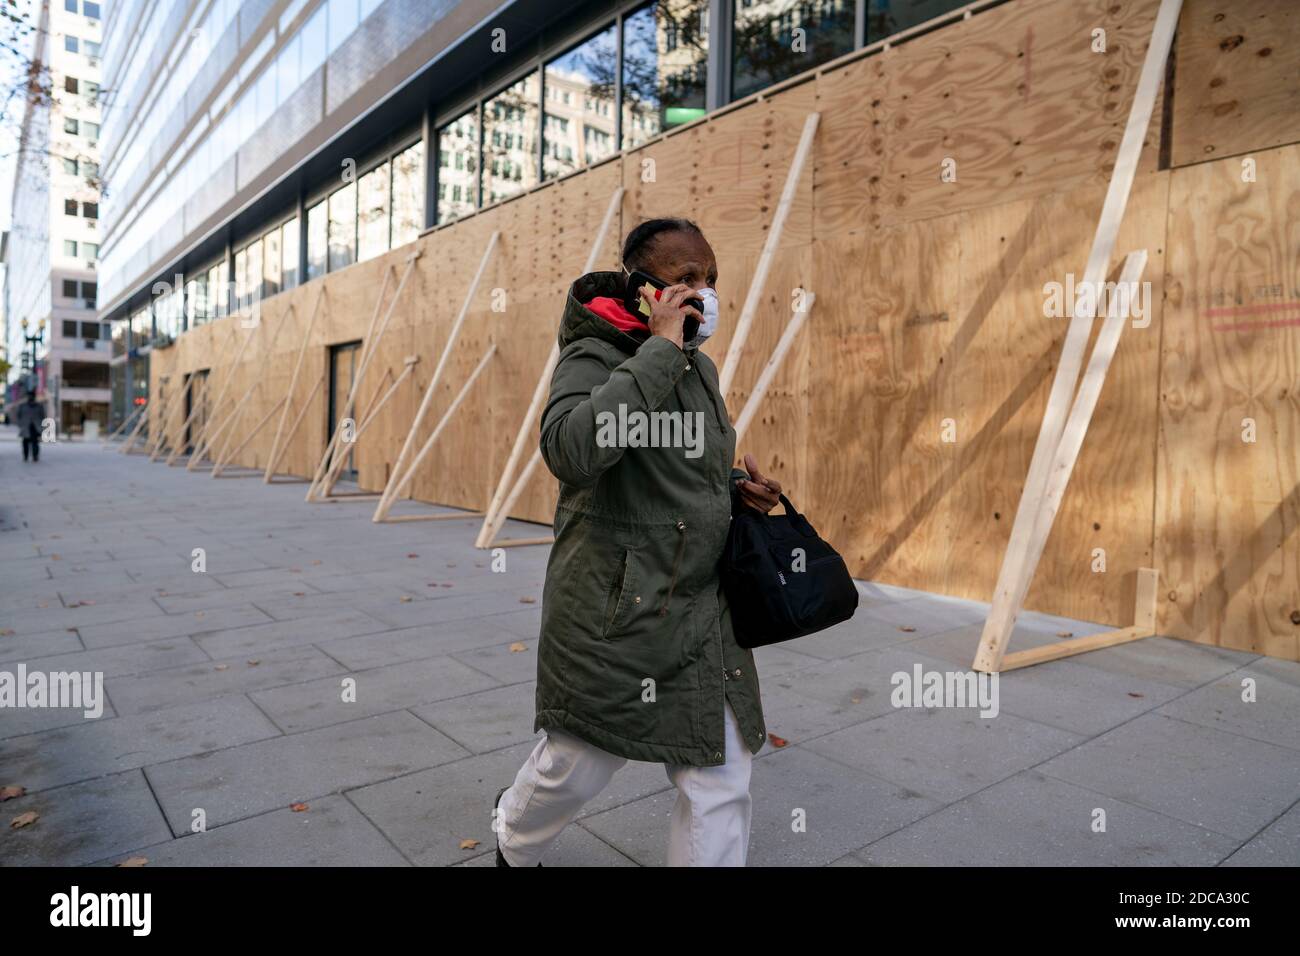 Washington, USA. 20th Nov, 2020. A man walks past an office building boarded up with plywood in Washington, DC, the United States, on Nov. 19, 2020. The number of initial jobless claims in the United States rose to 742,000 last week, as the labor market recovery slows amid surging COVID-19 cases, the Labor Department reported on Thursday. Credit: Liu Jie/Xinhua/Alamy Live News Stock Photo